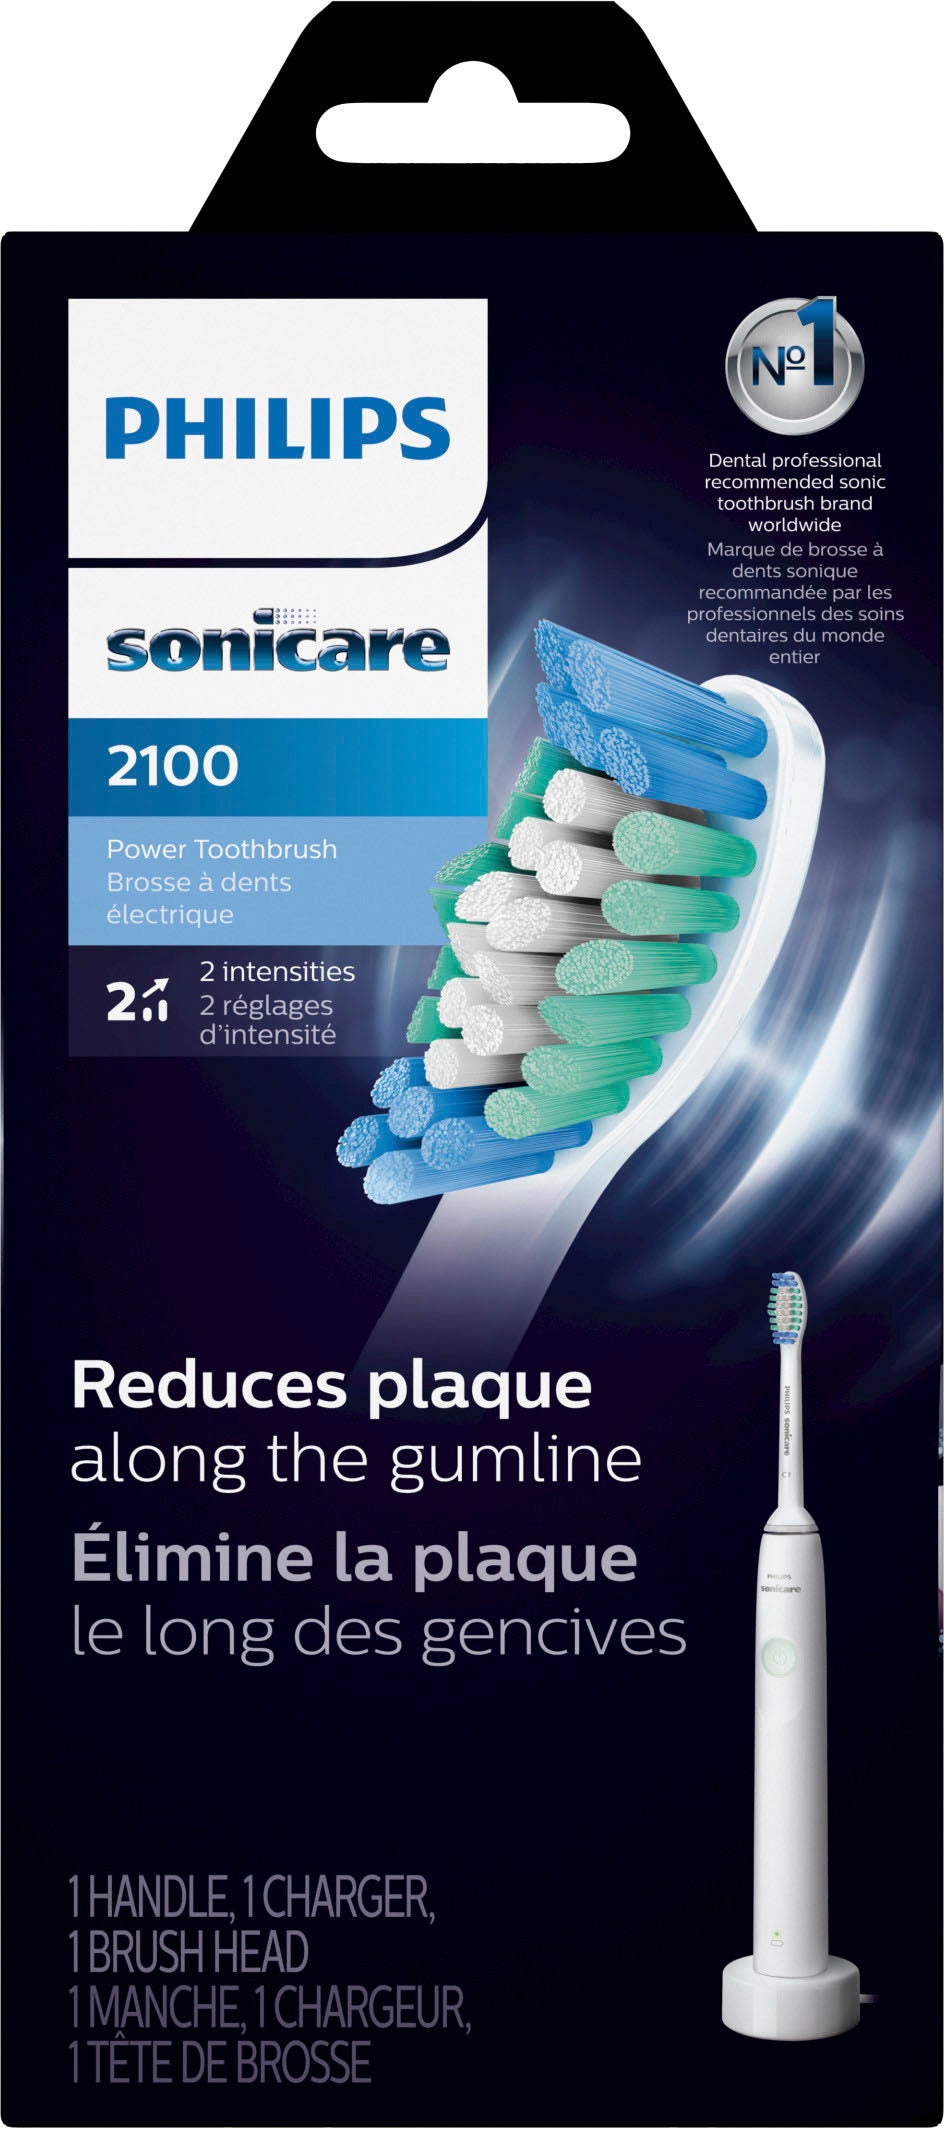 Philips Sonicare - 2100 Power Toothbrush, Rechargeable Electric Toothbrush - White Mint_4